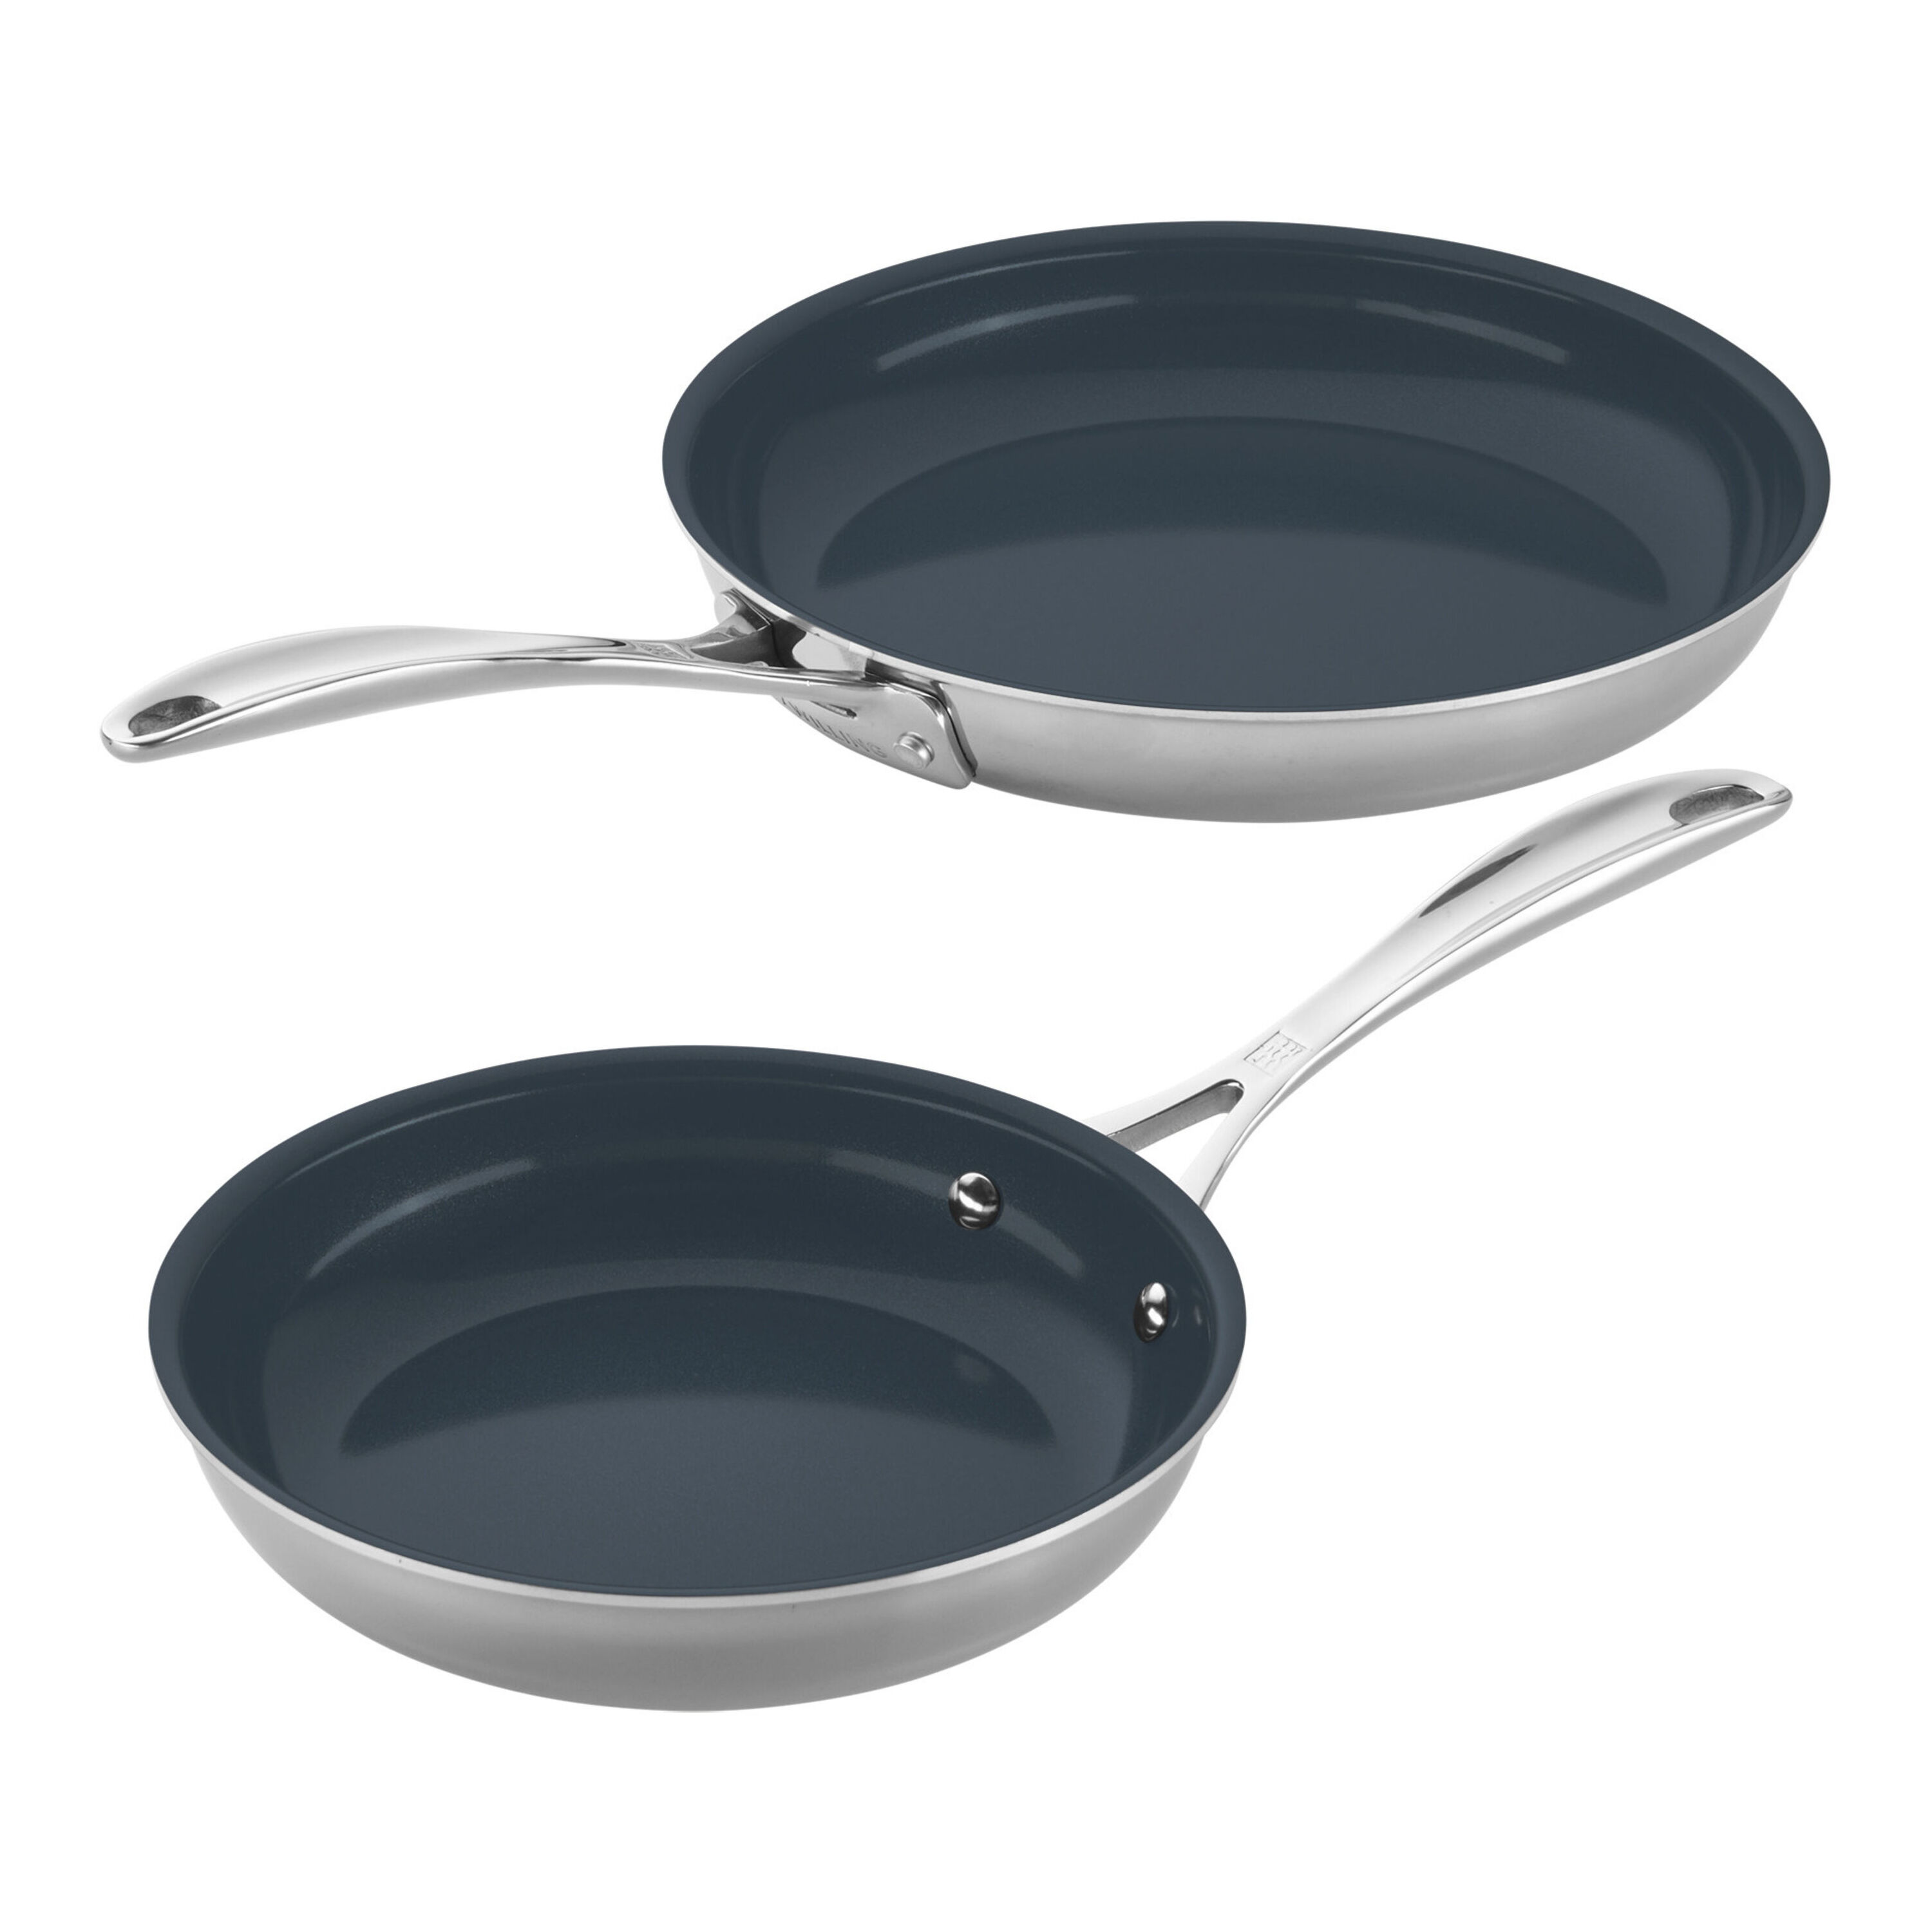 ZWILLING Spirit Ceramic Nonstick Pan with 4 inserts for eggs, gently used